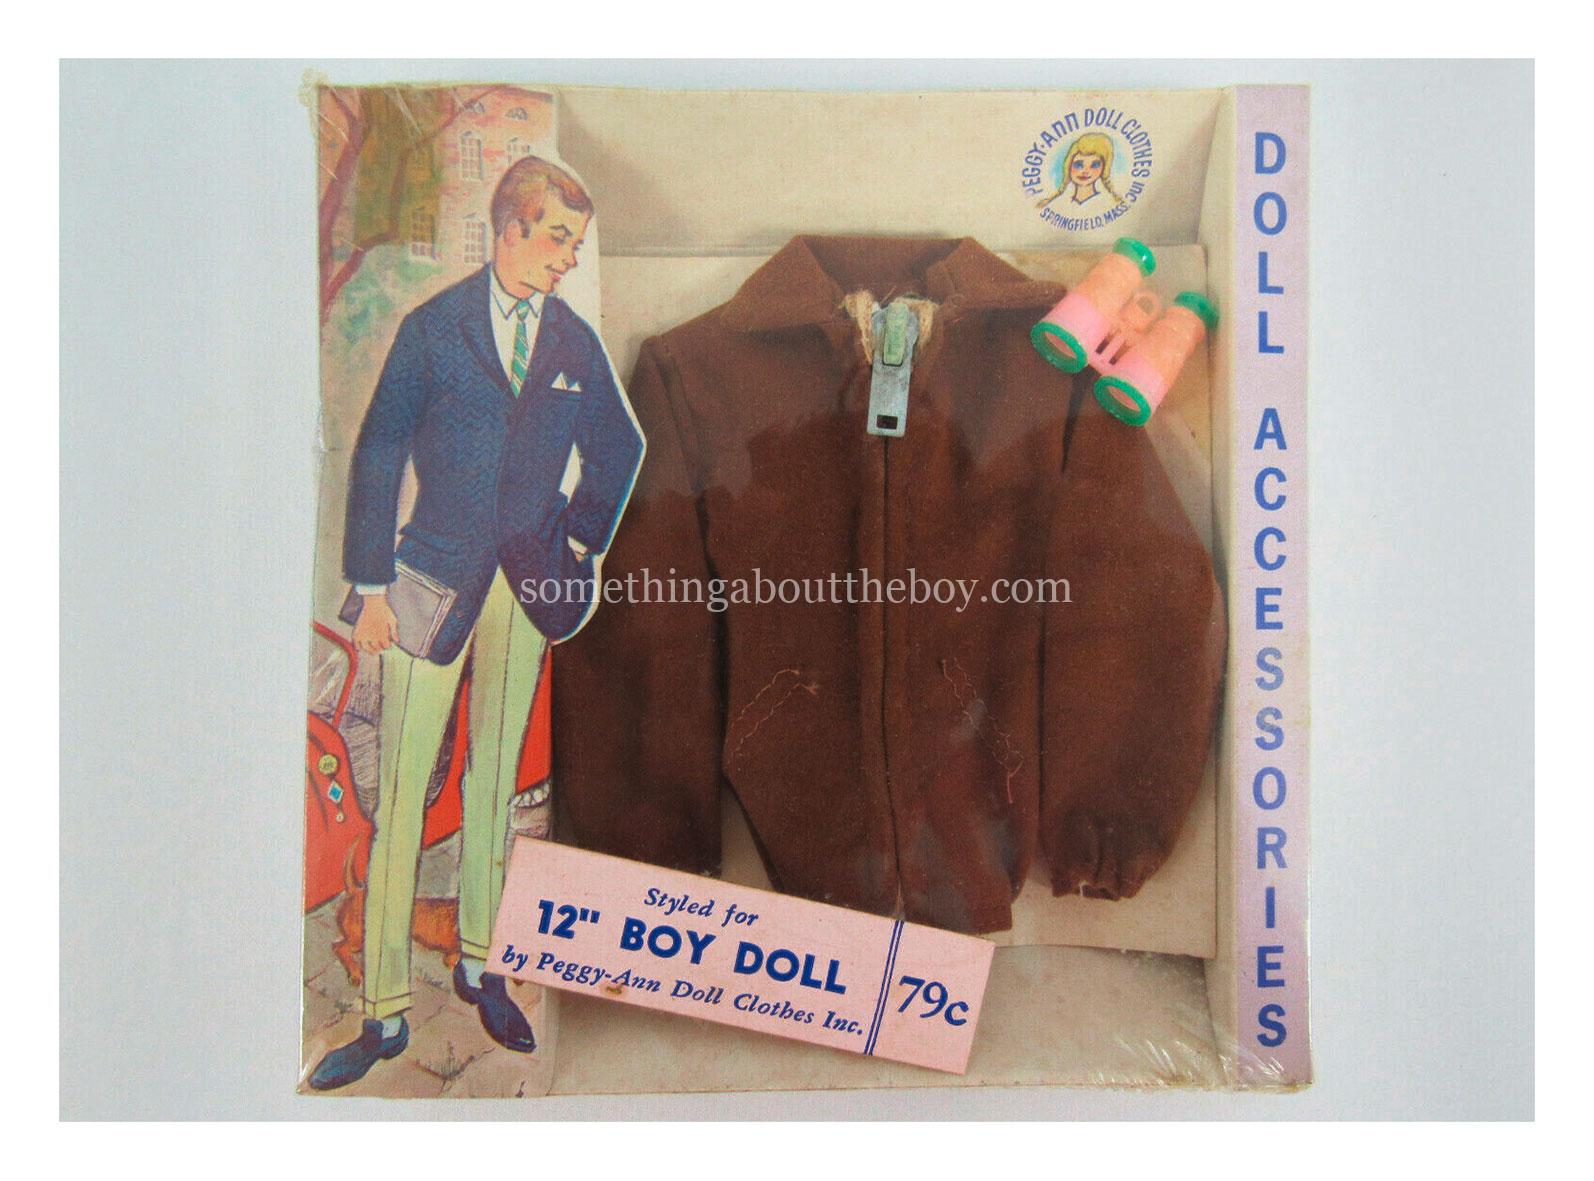 Jacket and binoculars by Peggy-Ann Doll Clothes Inc.